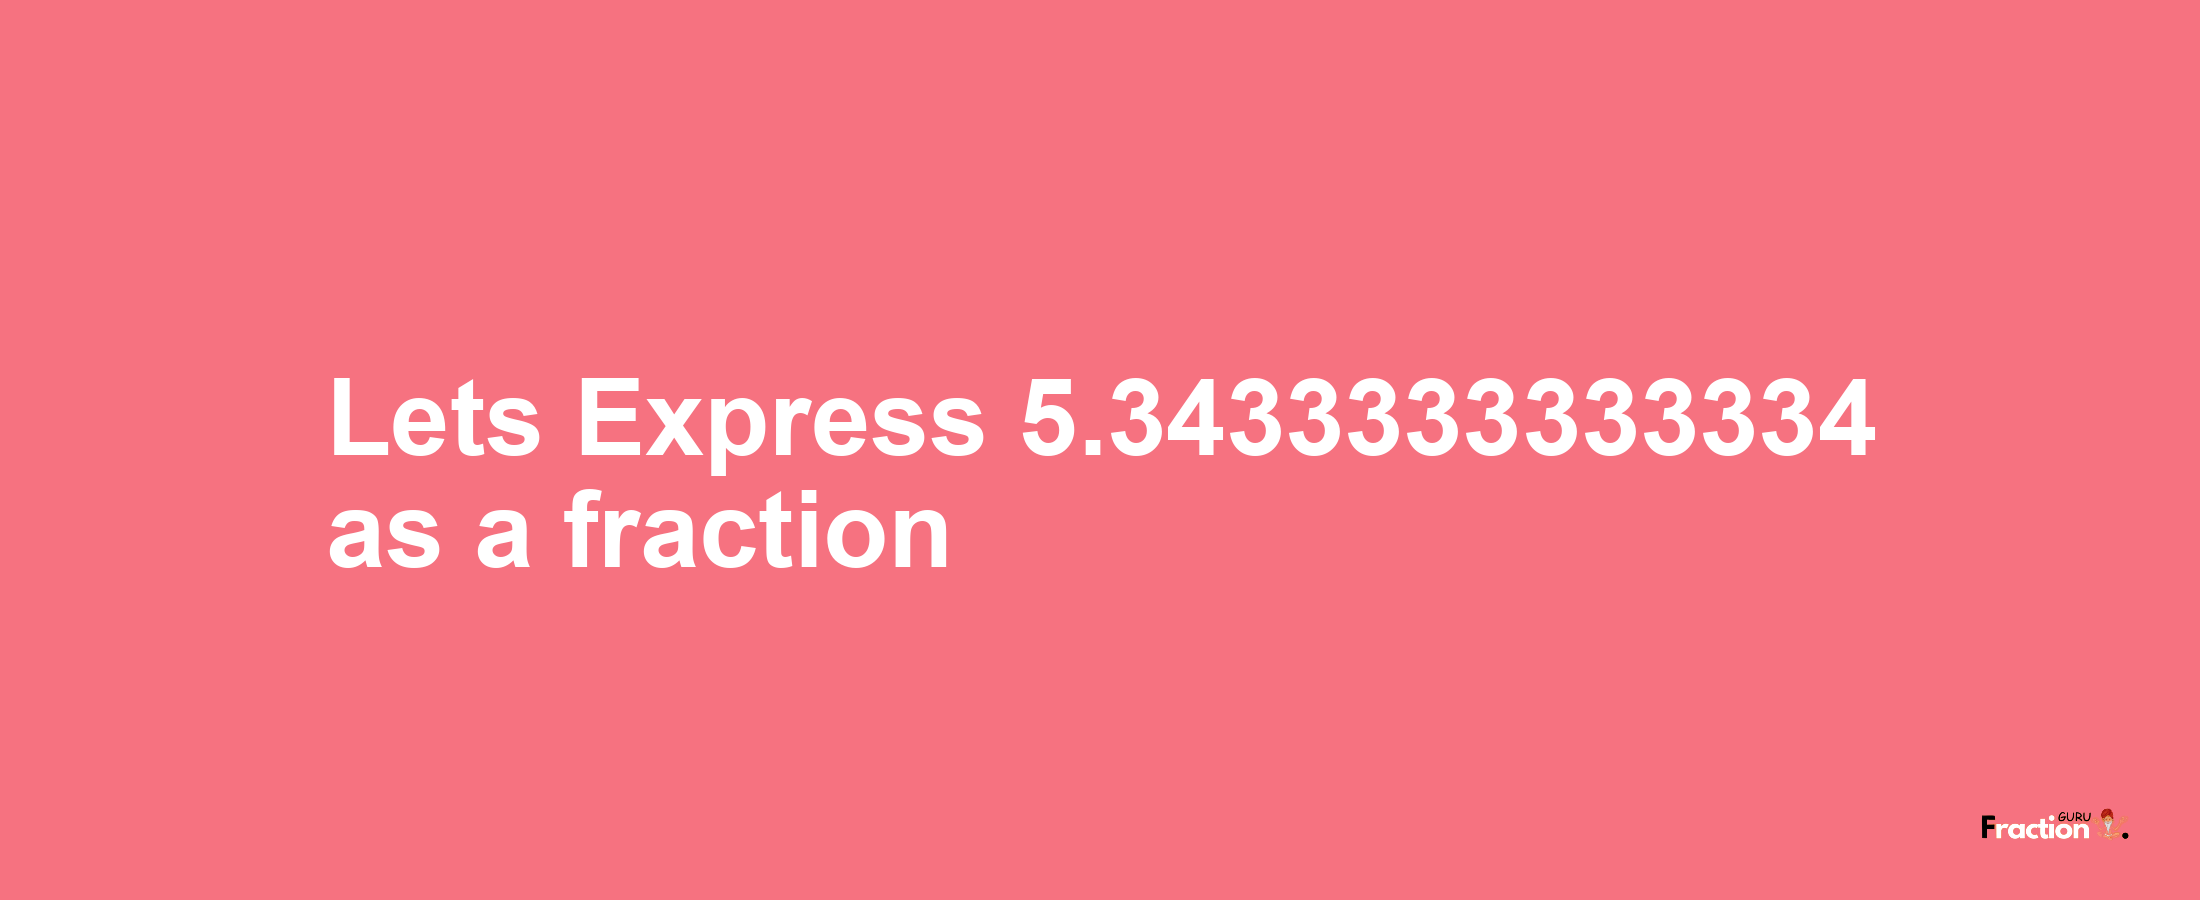 Lets Express 5.3433333333334 as afraction